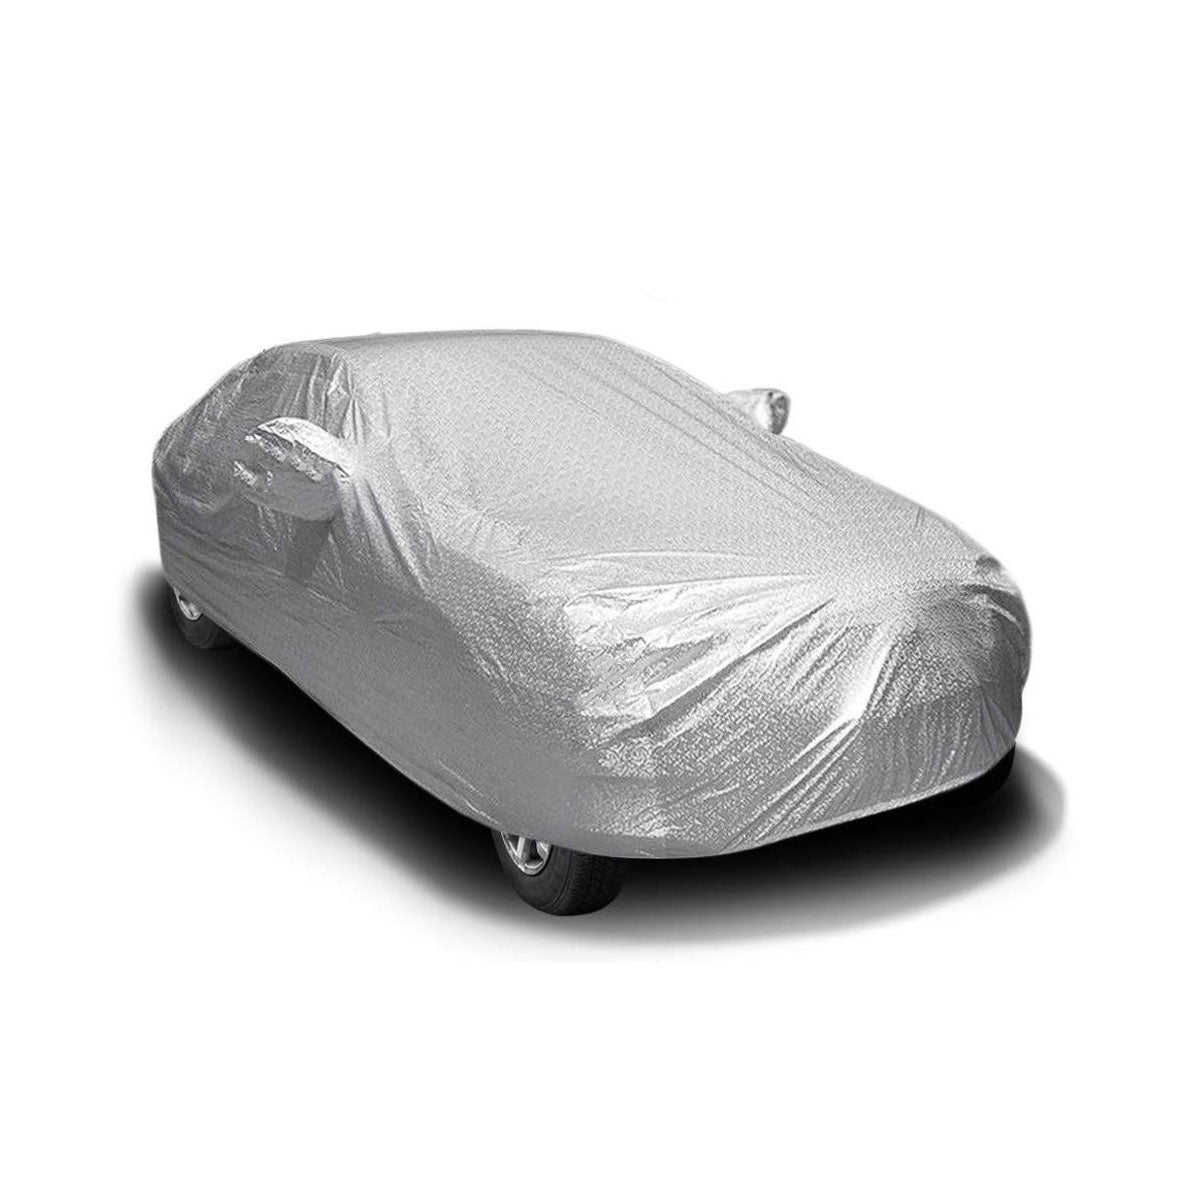 Oshotto Spyro Silver Anti Reflective, dustproof and Water Proof Car Body Cover with Mirror Pockets For Mitsubishi Pajero Sport